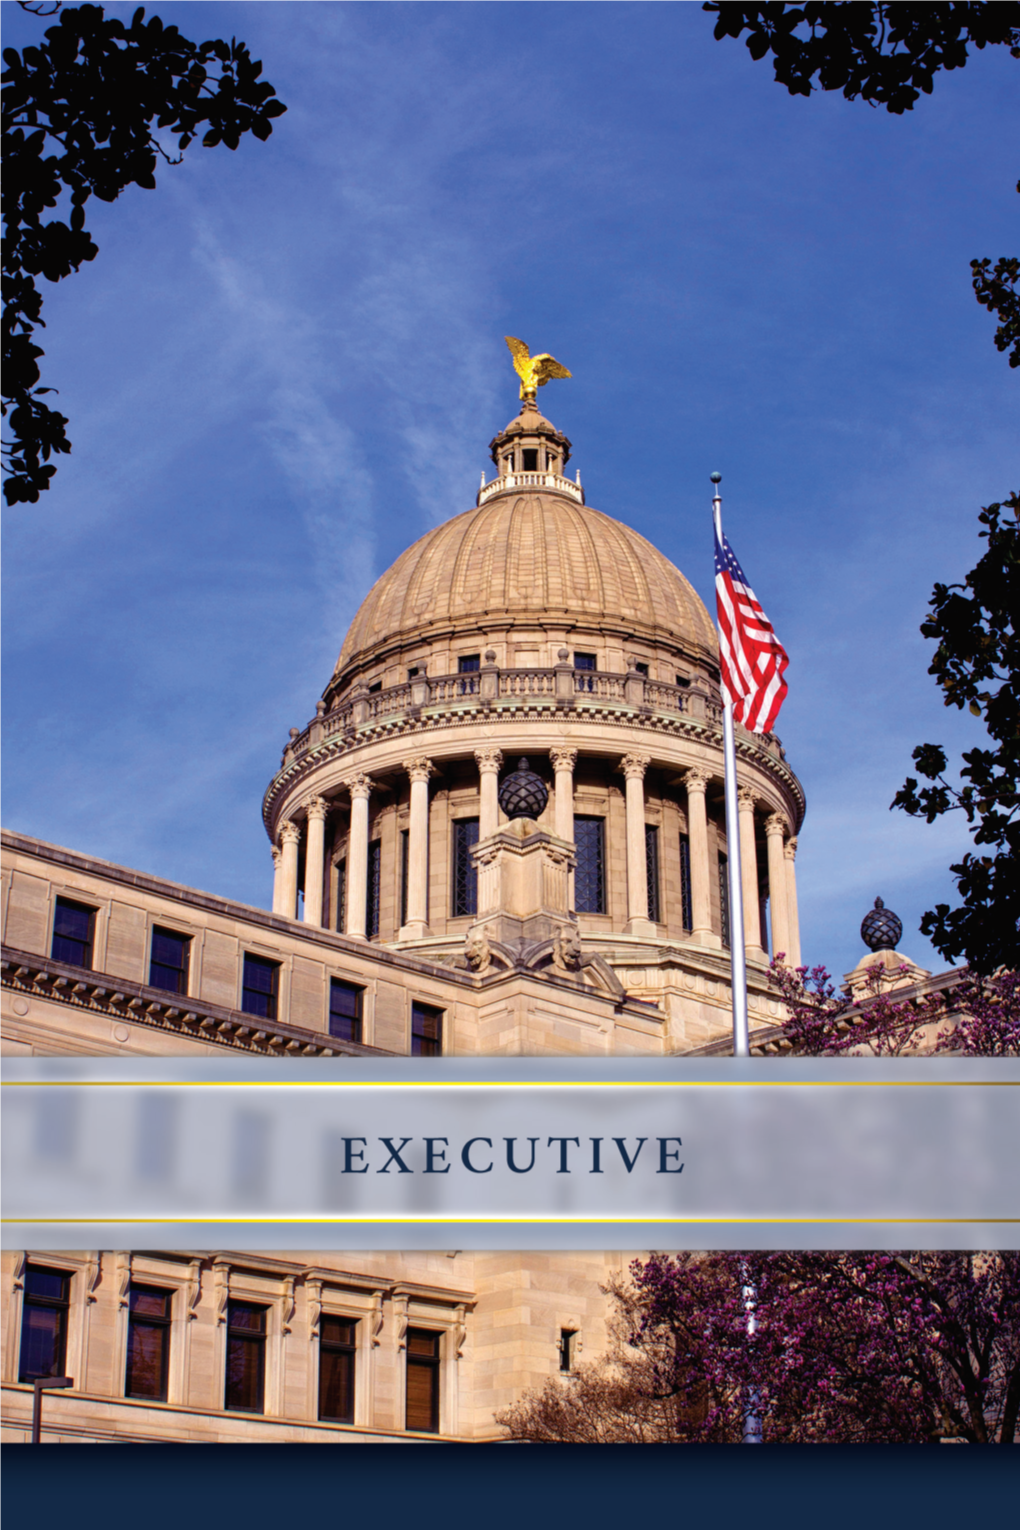 EXECUTIVE Article 5 and Article 6 of the Mississippi Constitution of 1890 Authorize the Duties and Responsibilities of the Statewide Elected Officials